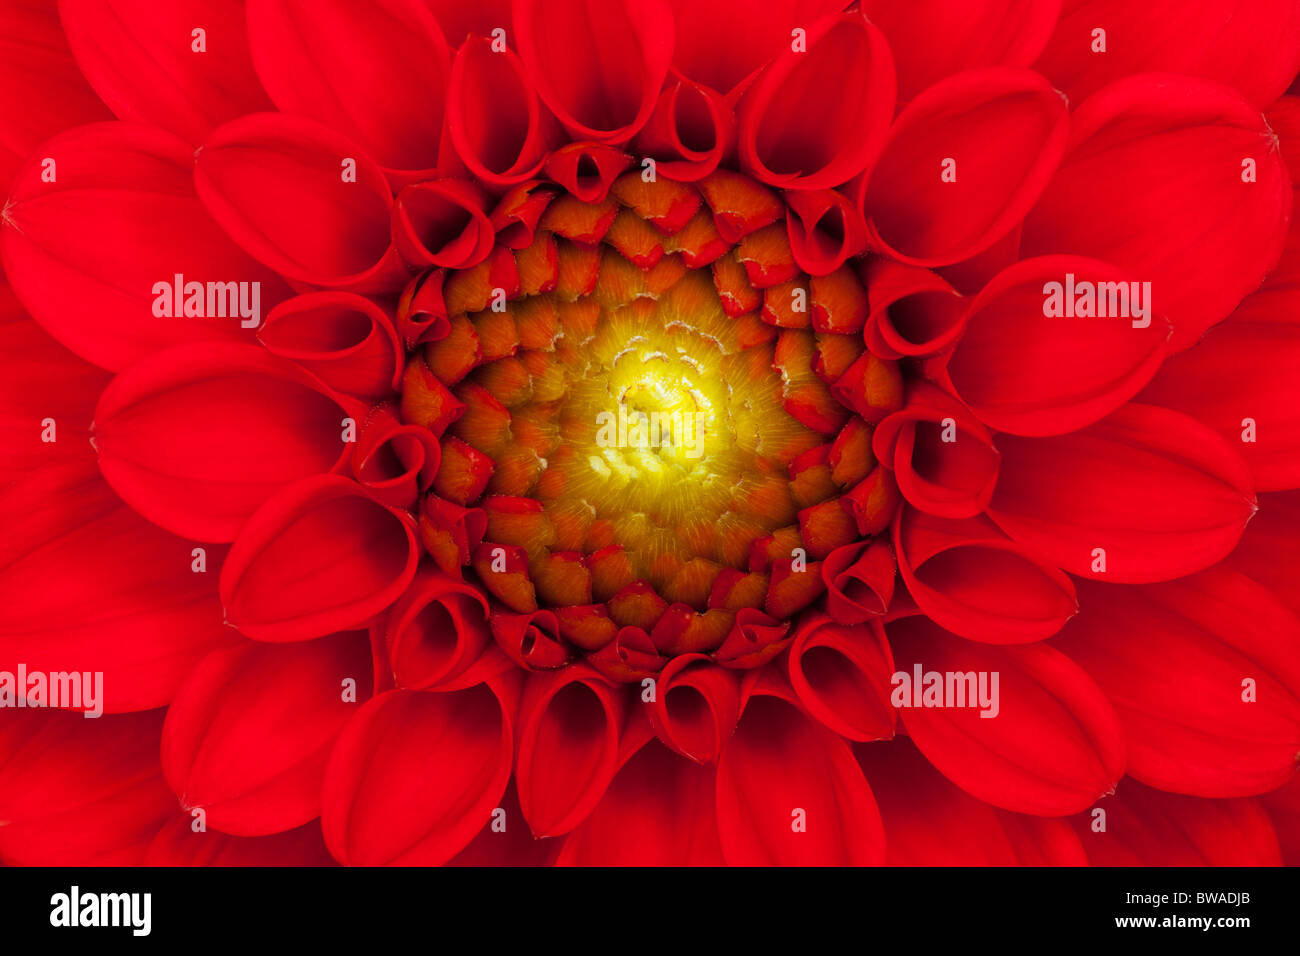 Close up photo of a red dahlia flower Stock Photo